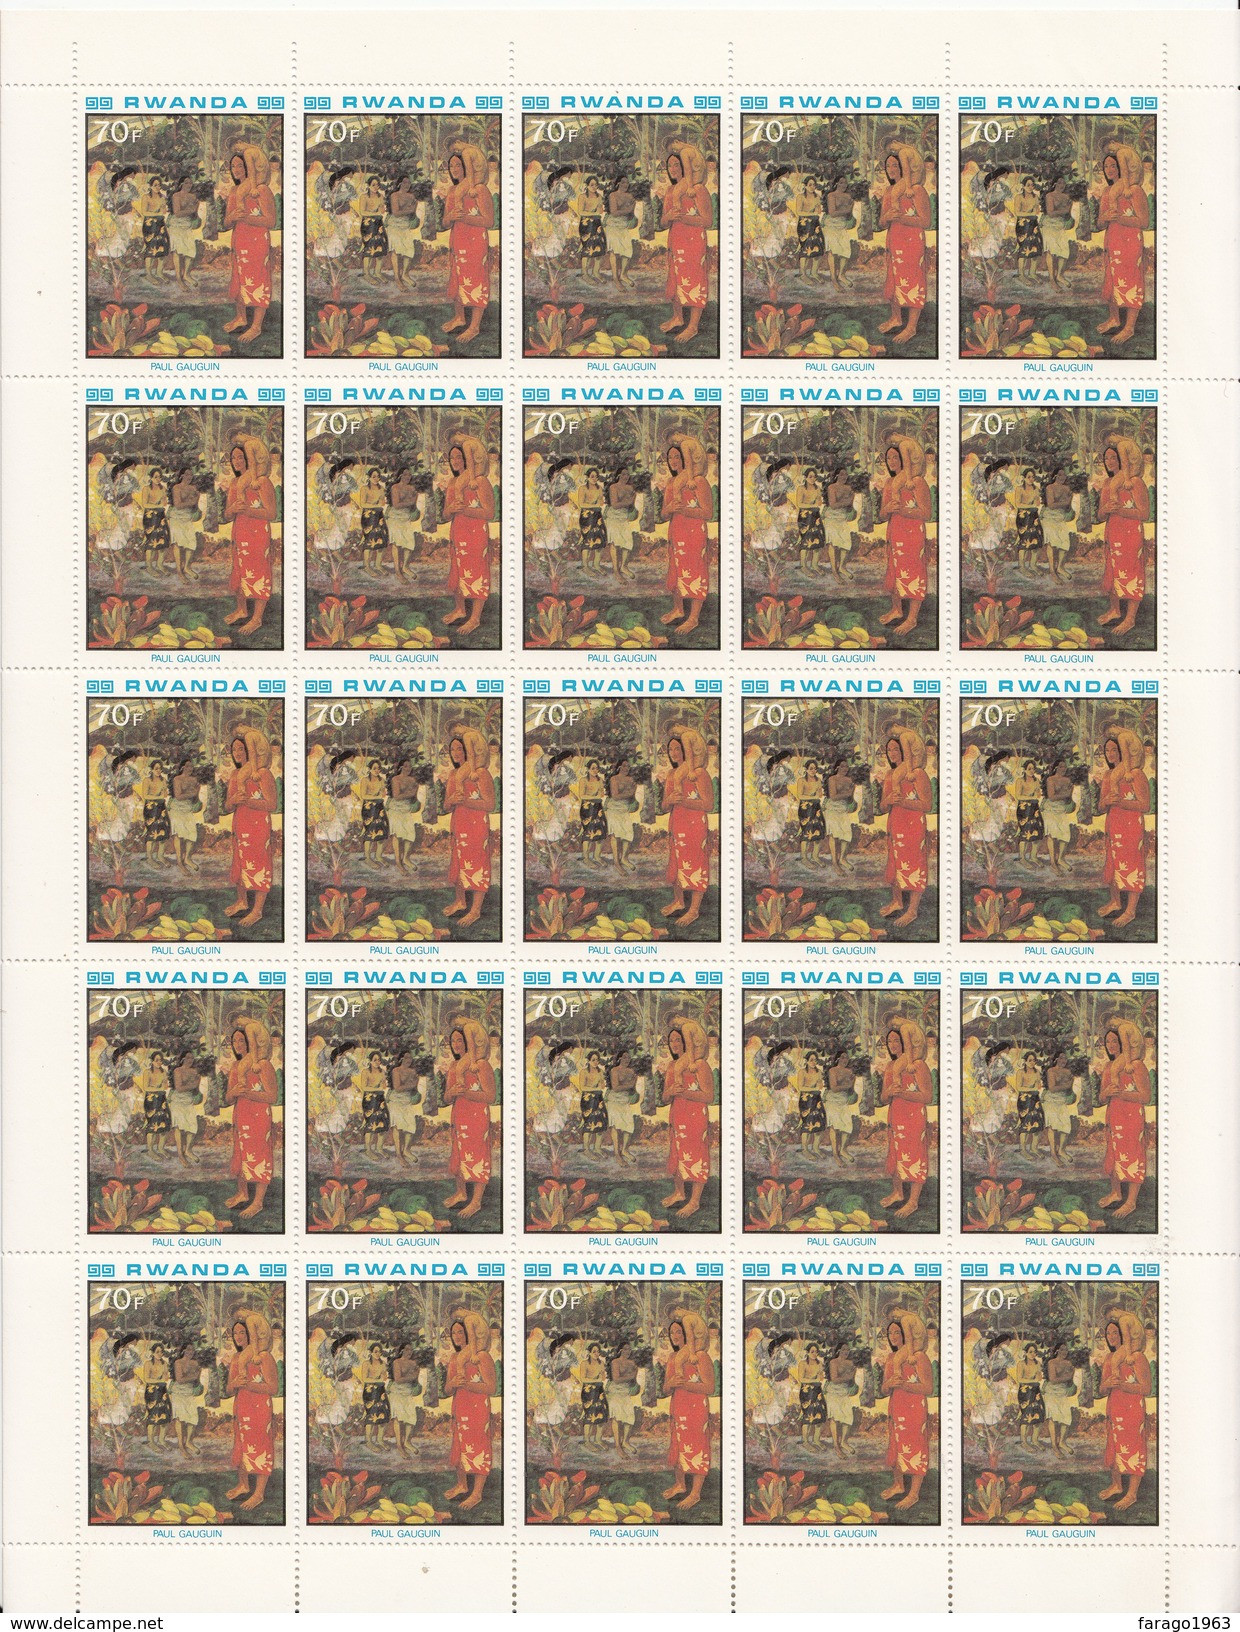 1980 Rwanda 70F Gauguin "Tahaitian Women" Painting Complete Sheet Of 25 MNH  SUPER CHEAP Not In Every Collection - Impressionismus